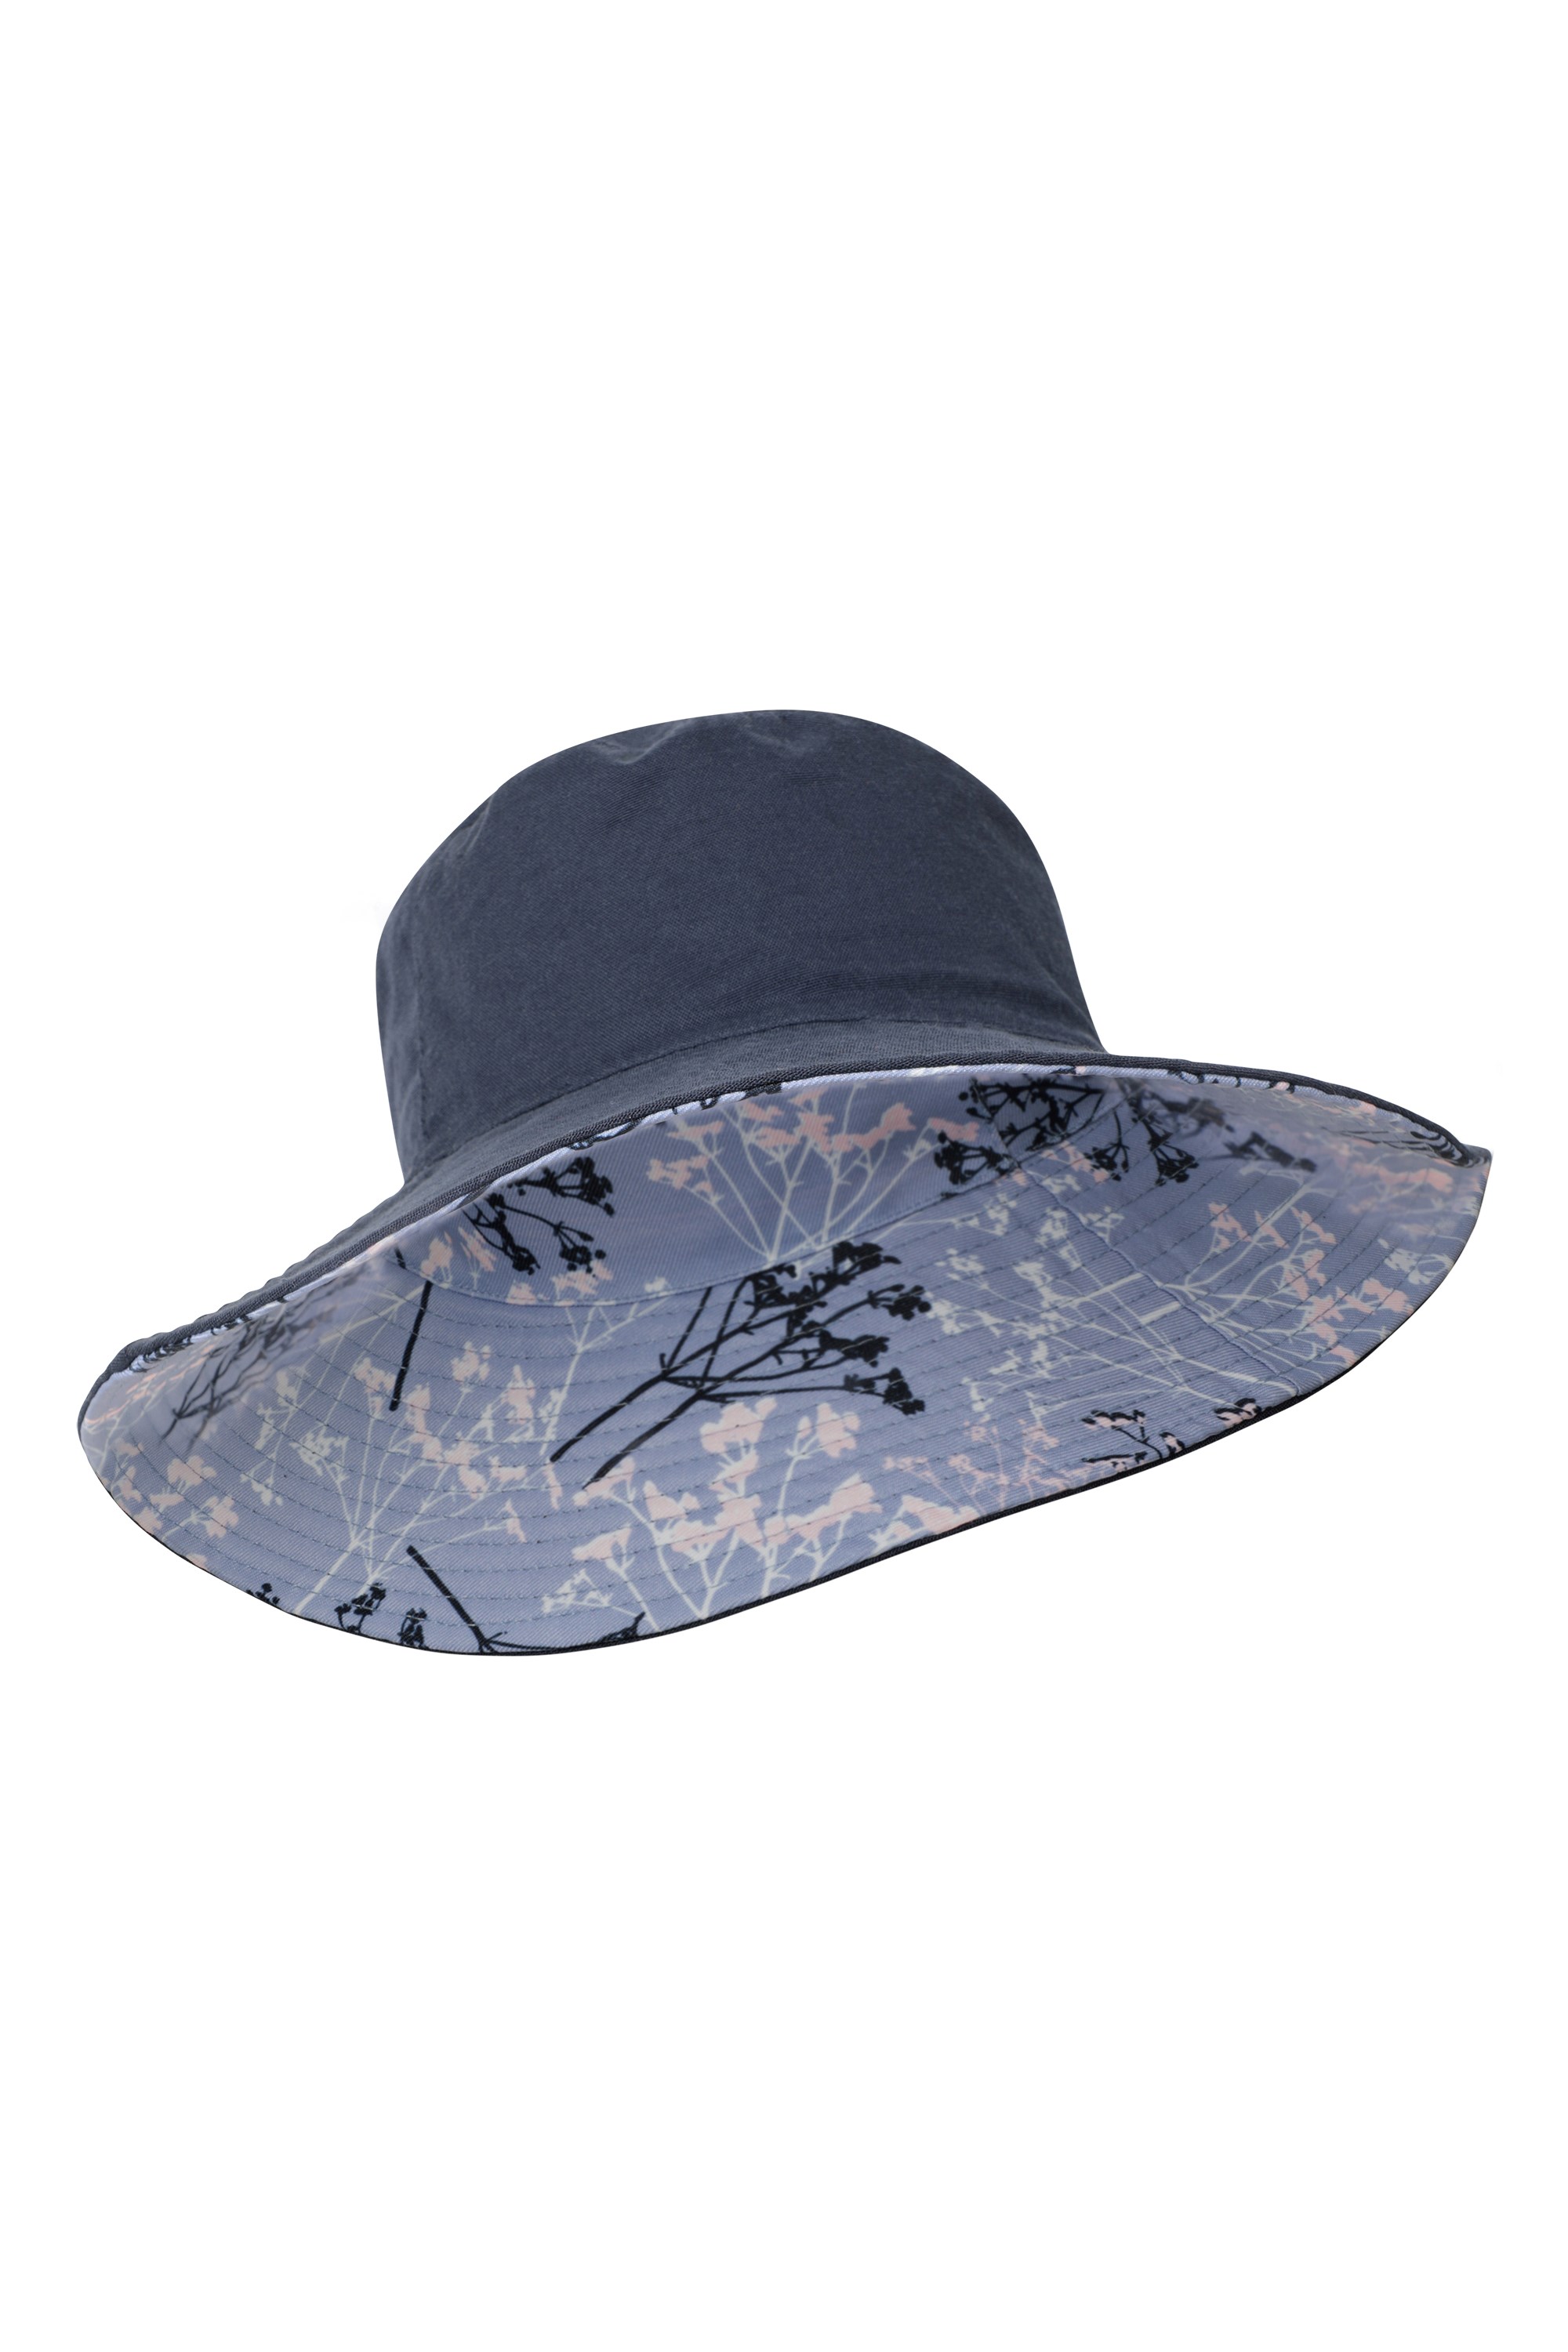 Mountain Warehouse Reversible Womens Printed Sun Hat - Navy | Size ONE